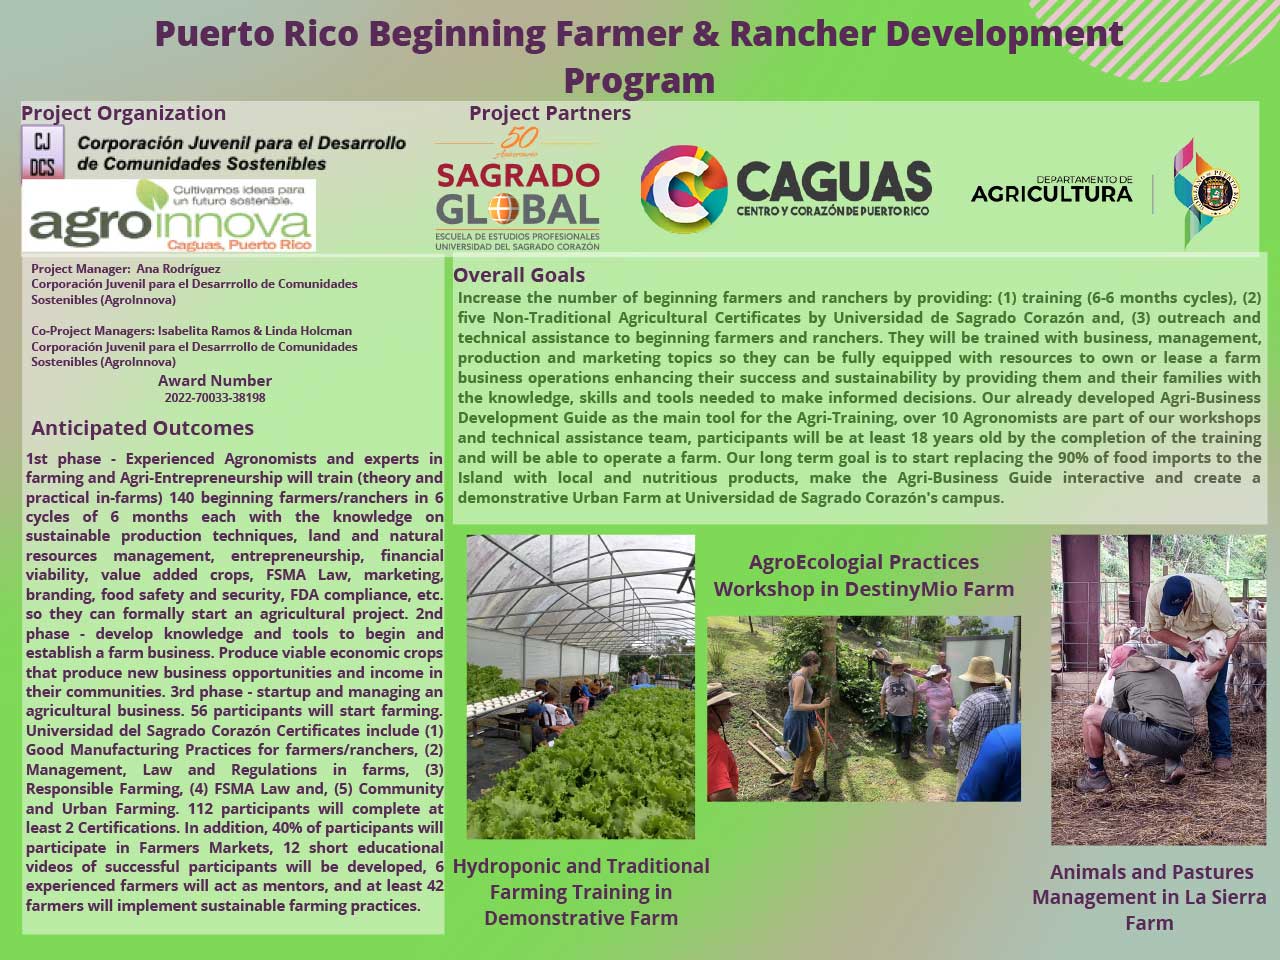 Provide training (theorIcal and practical), education, outreach and technical assistance poster